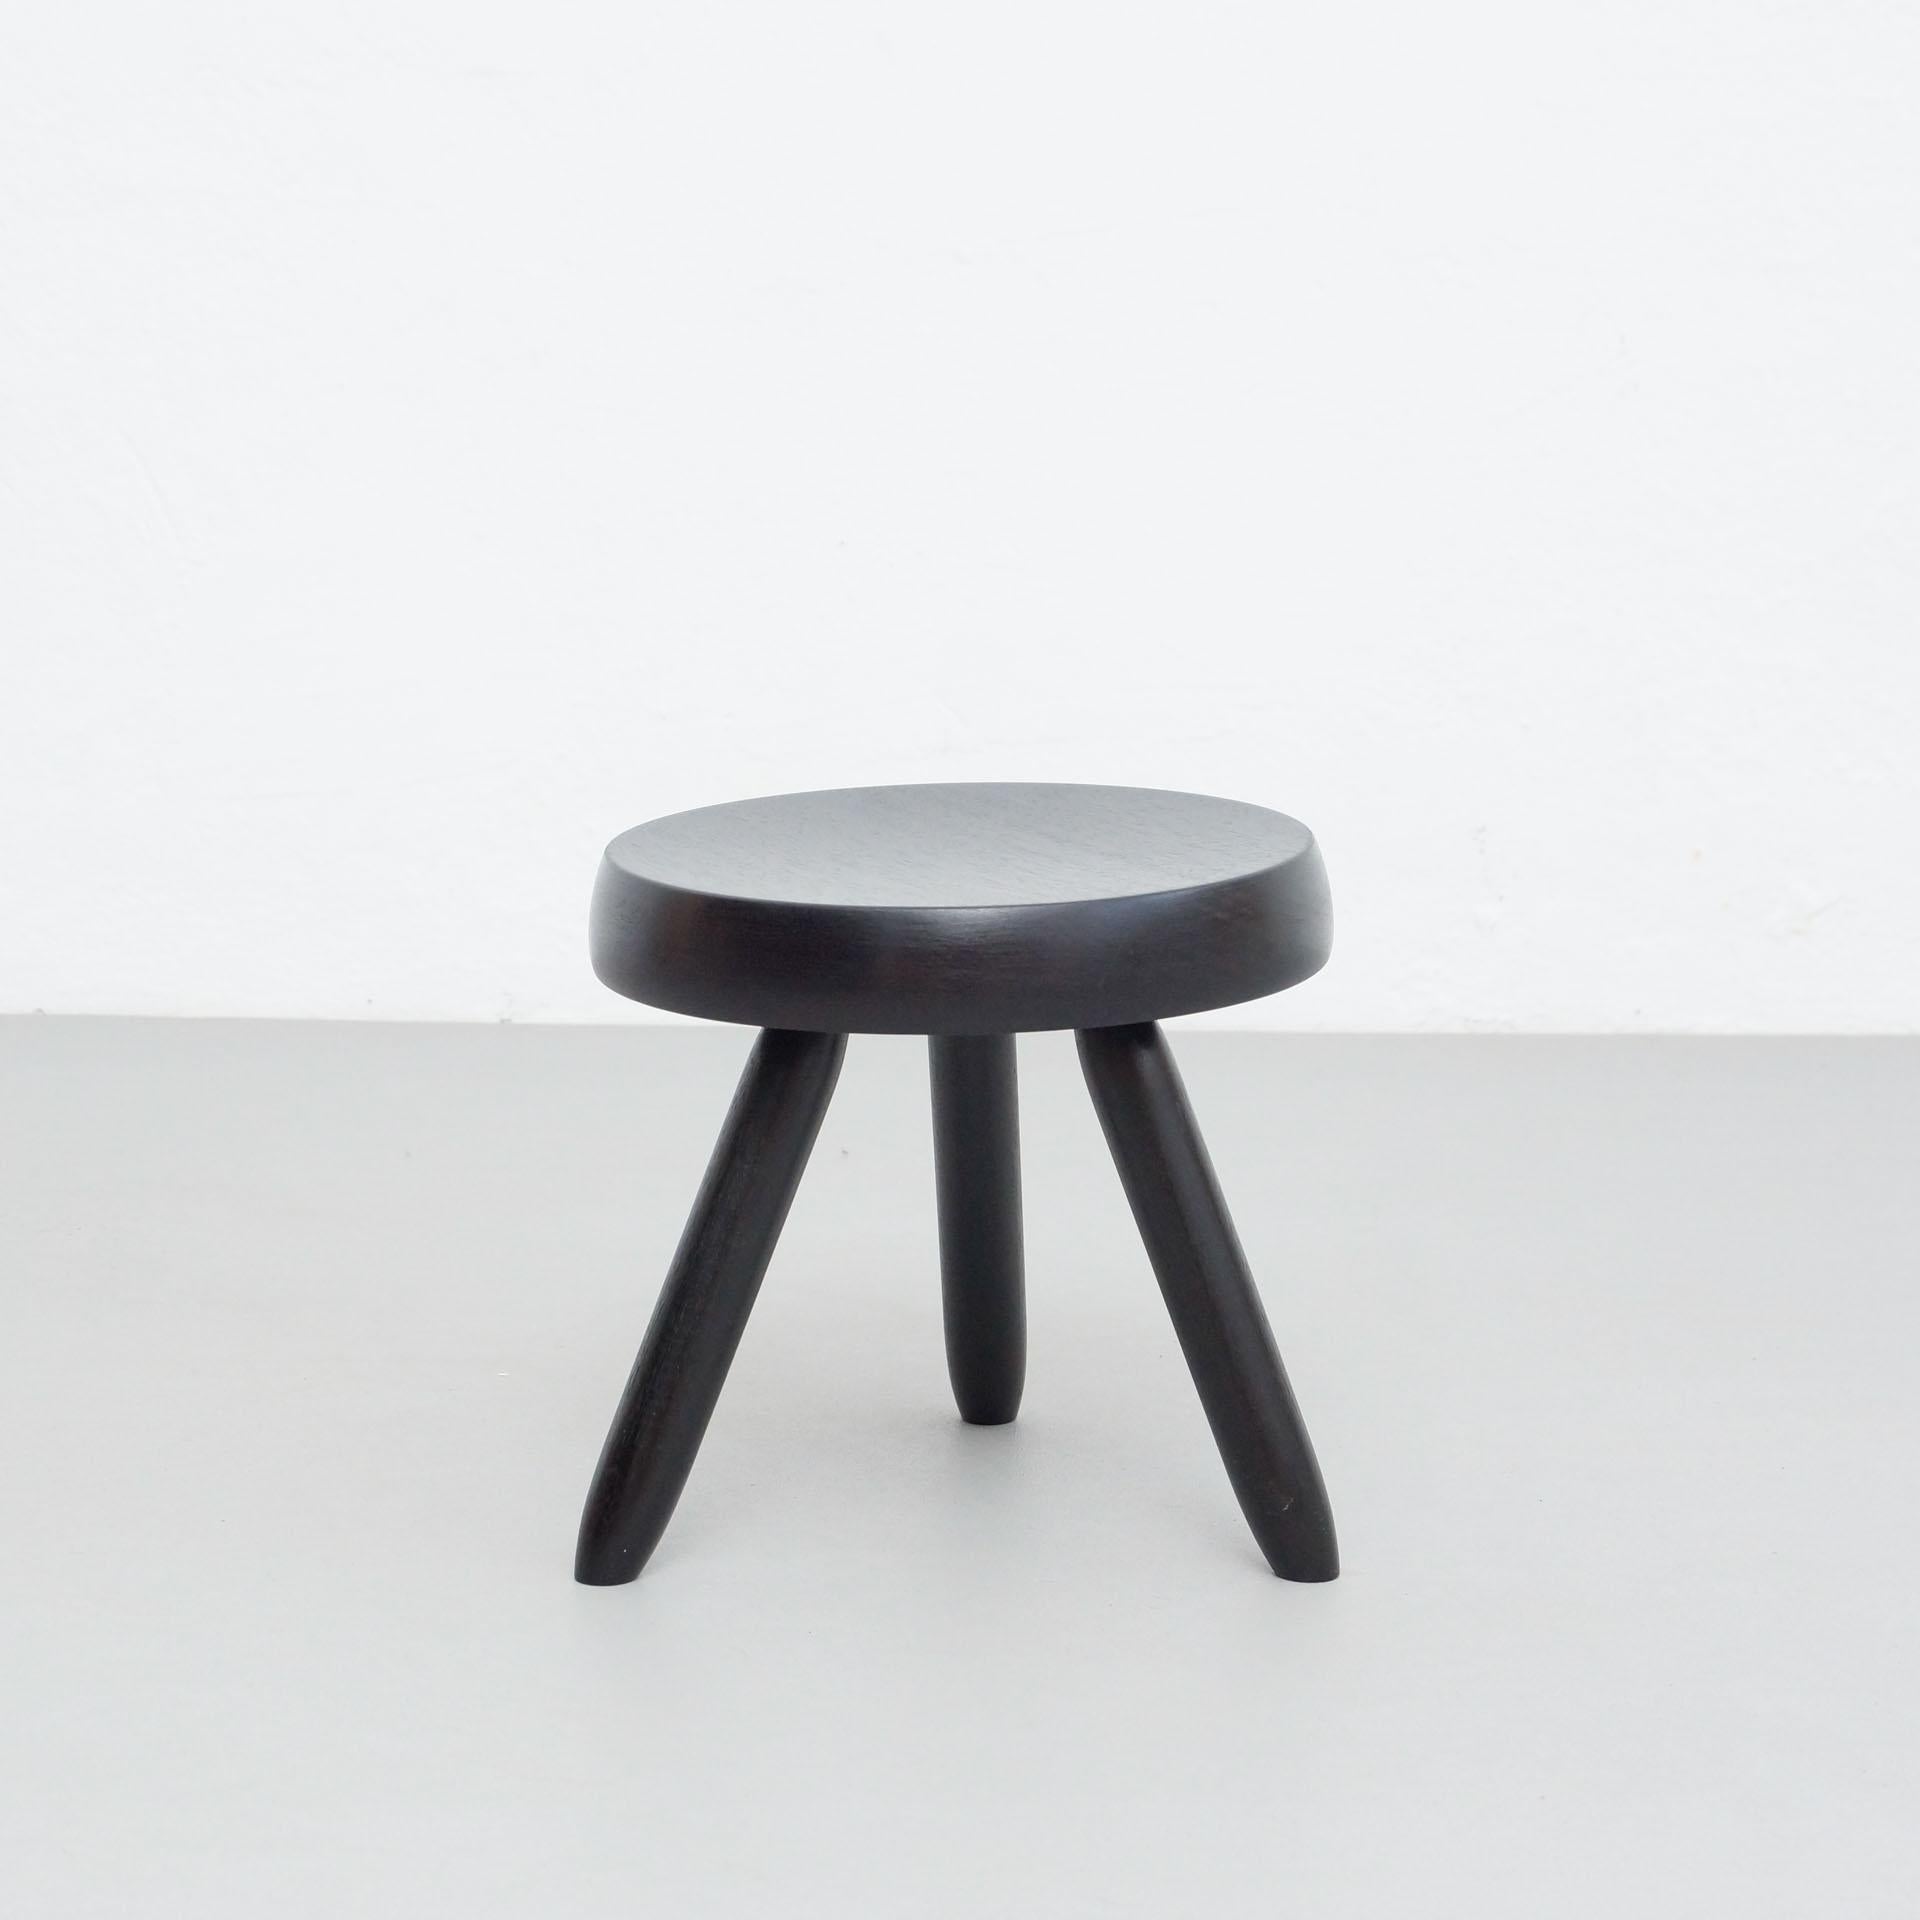 Stool designed in the style of Charlotte Perriand.
Made by unknown manufacturer.

In good original condition, preserving a beautiful patina, with minor wear consistent with age and use. 

Materials:
Wood

Dimensions:
ø 31.5 cm x H 30